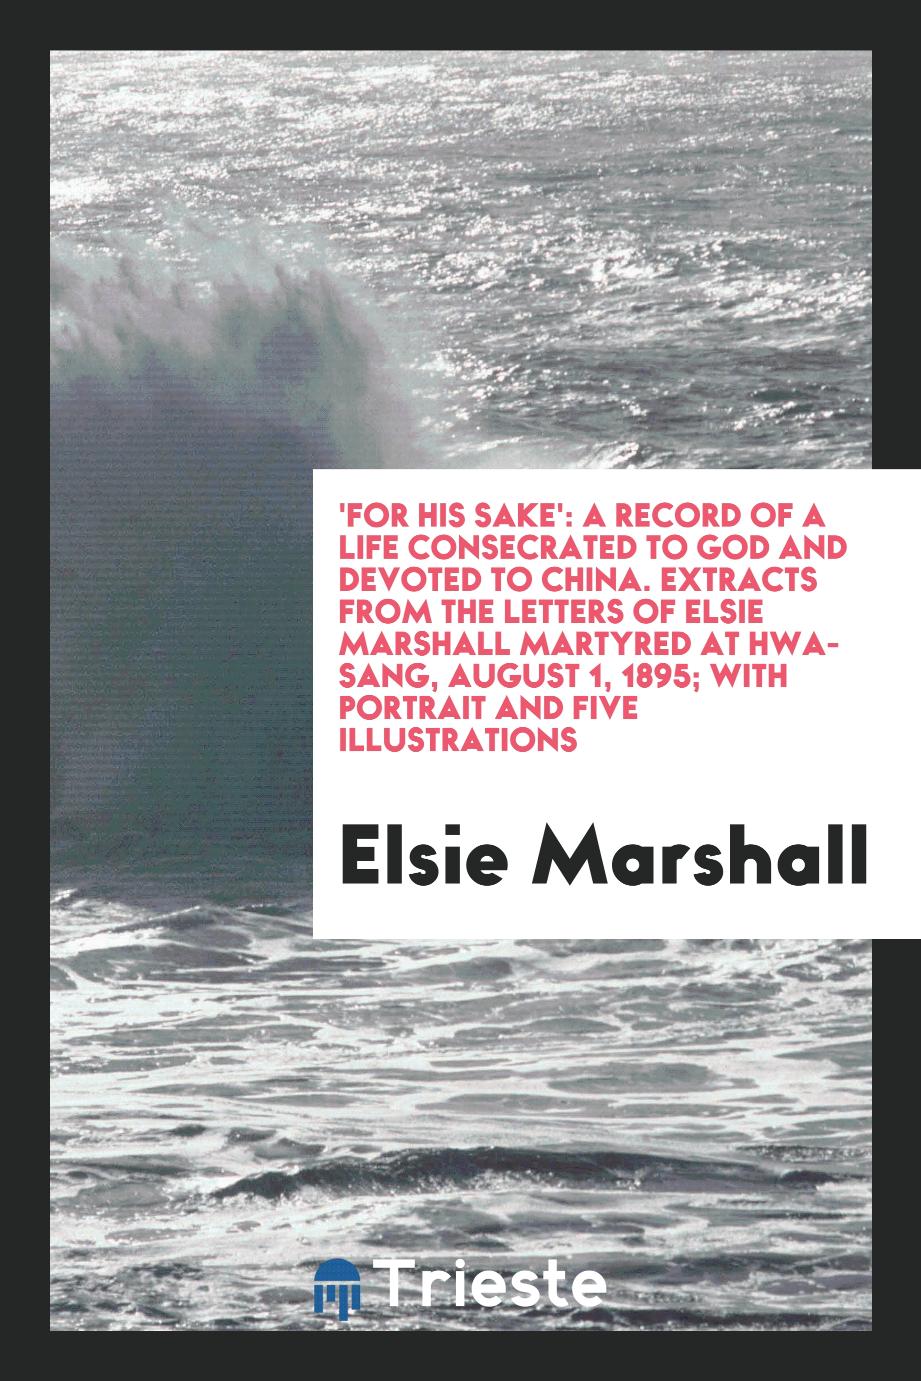 'For His Sake': A Record of a Life Consecrated to God and Devoted to China. Extracts from the Letters of Elsie Marshall Martyred at Hwa-Sang, August 1, 1895; With Portrait and Five Illustrations